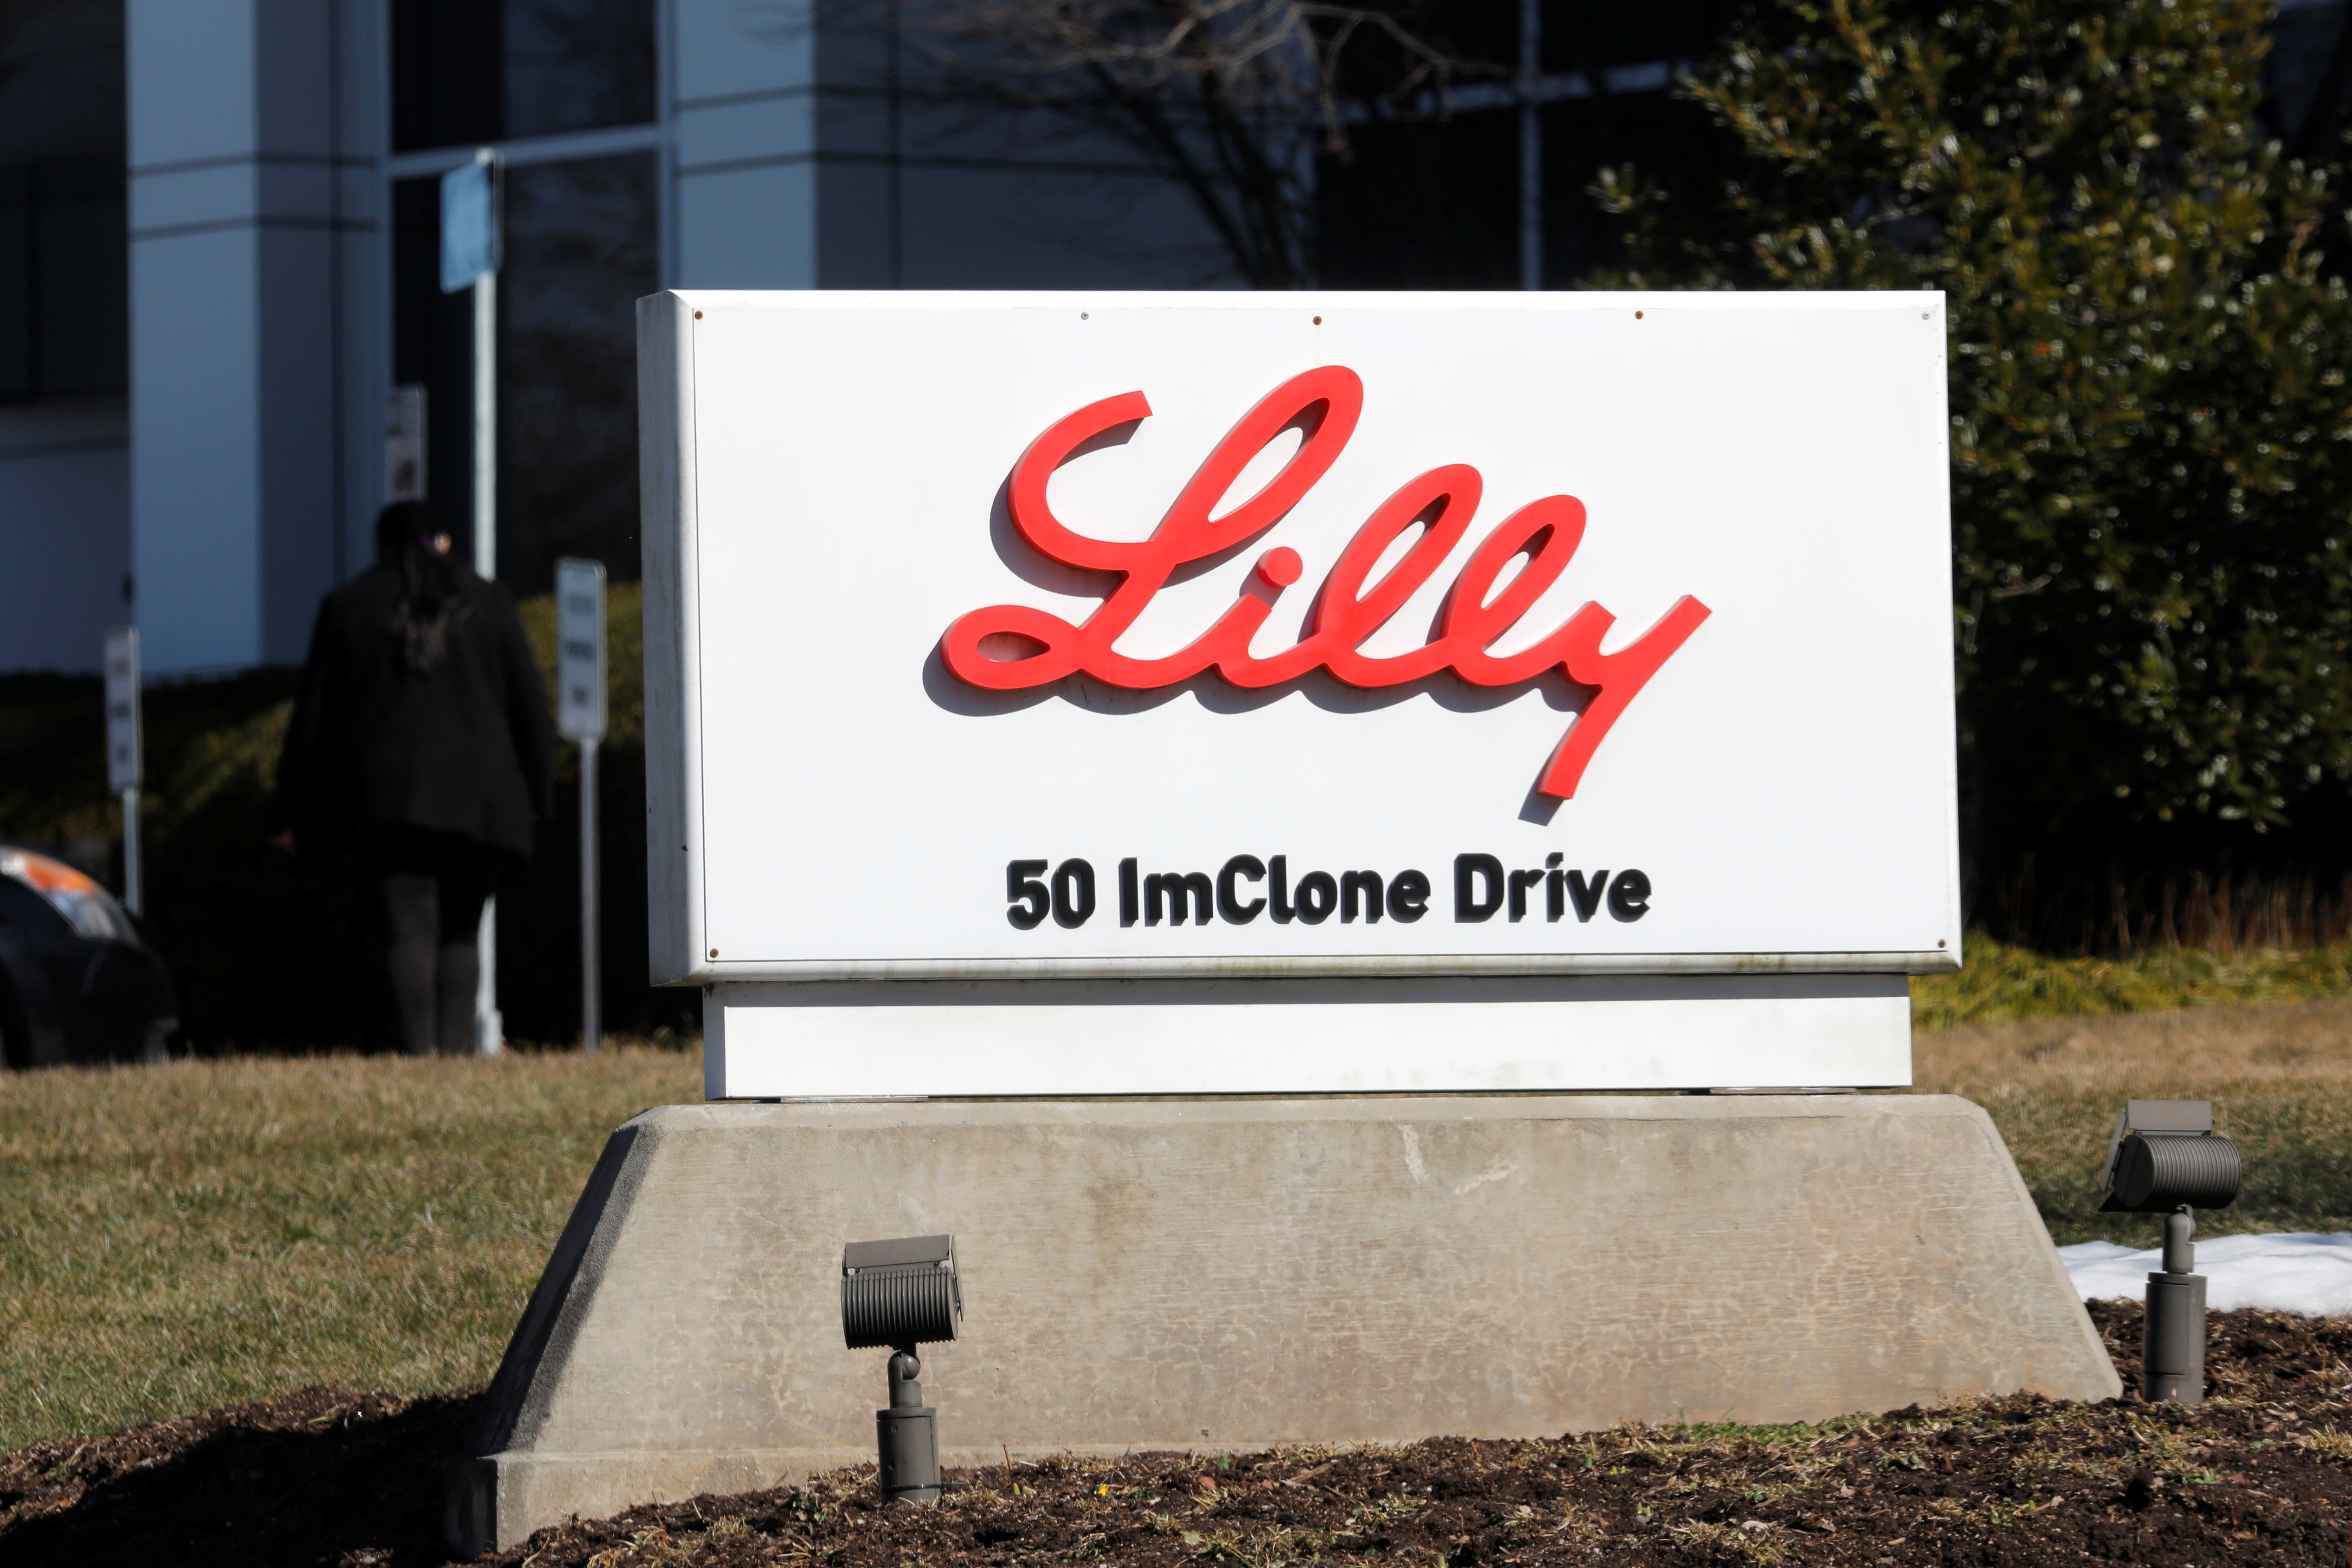 A sign is pictured outside an Eli Lilly and Company pharmaceutical manufacturing plant at 50 ImClone Drive in Branchburg, New Jersey, March 5, 2021.  REUTERS/Mike Segar